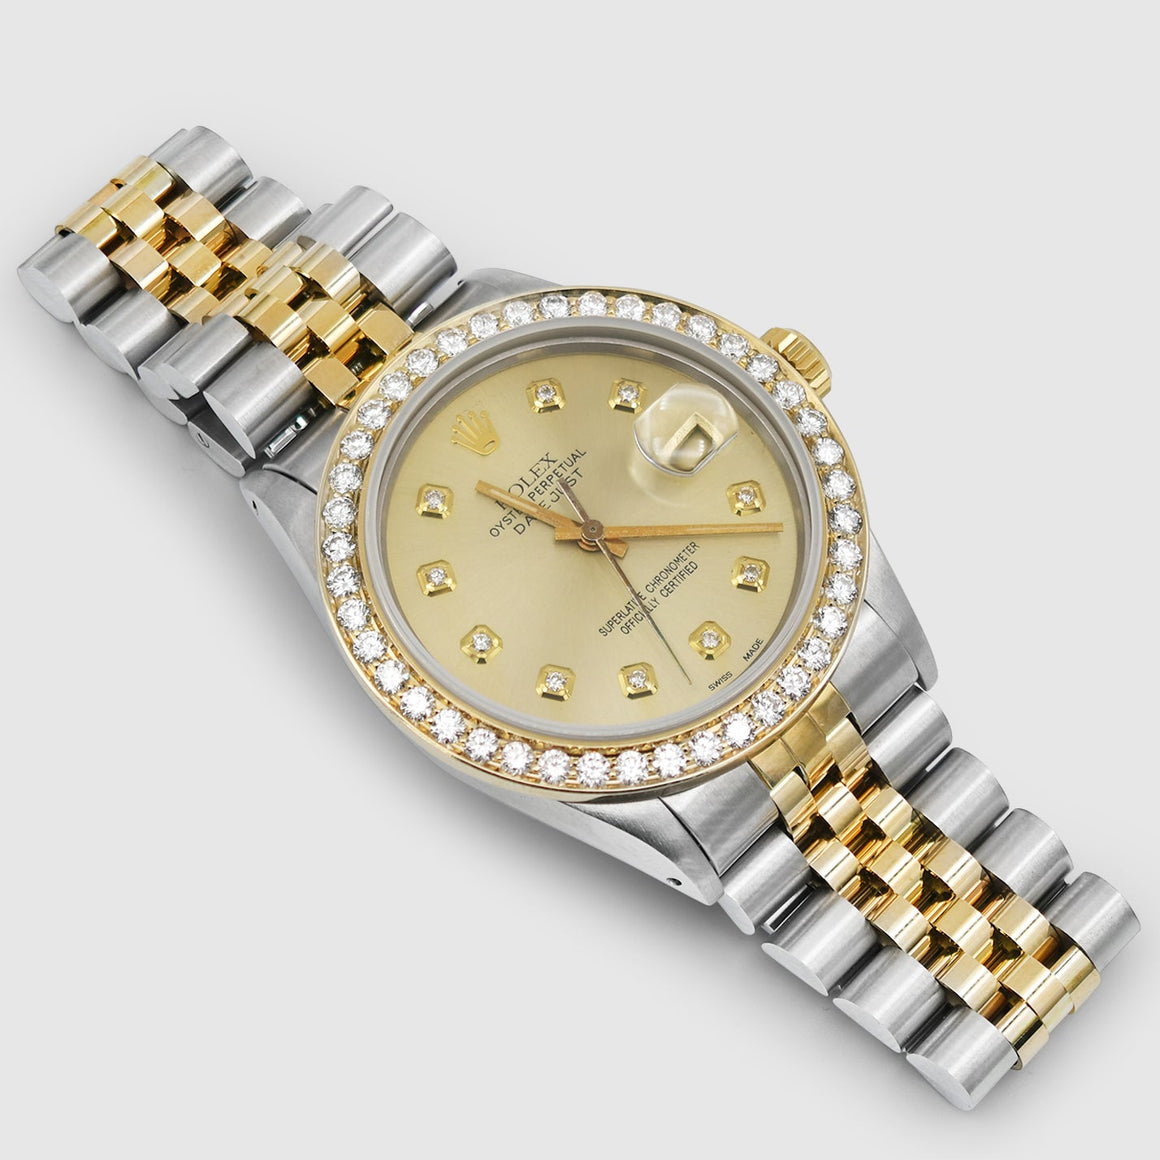 Diamond Rolex DateJust 36mm Two-Tone Champagne Dial Watch